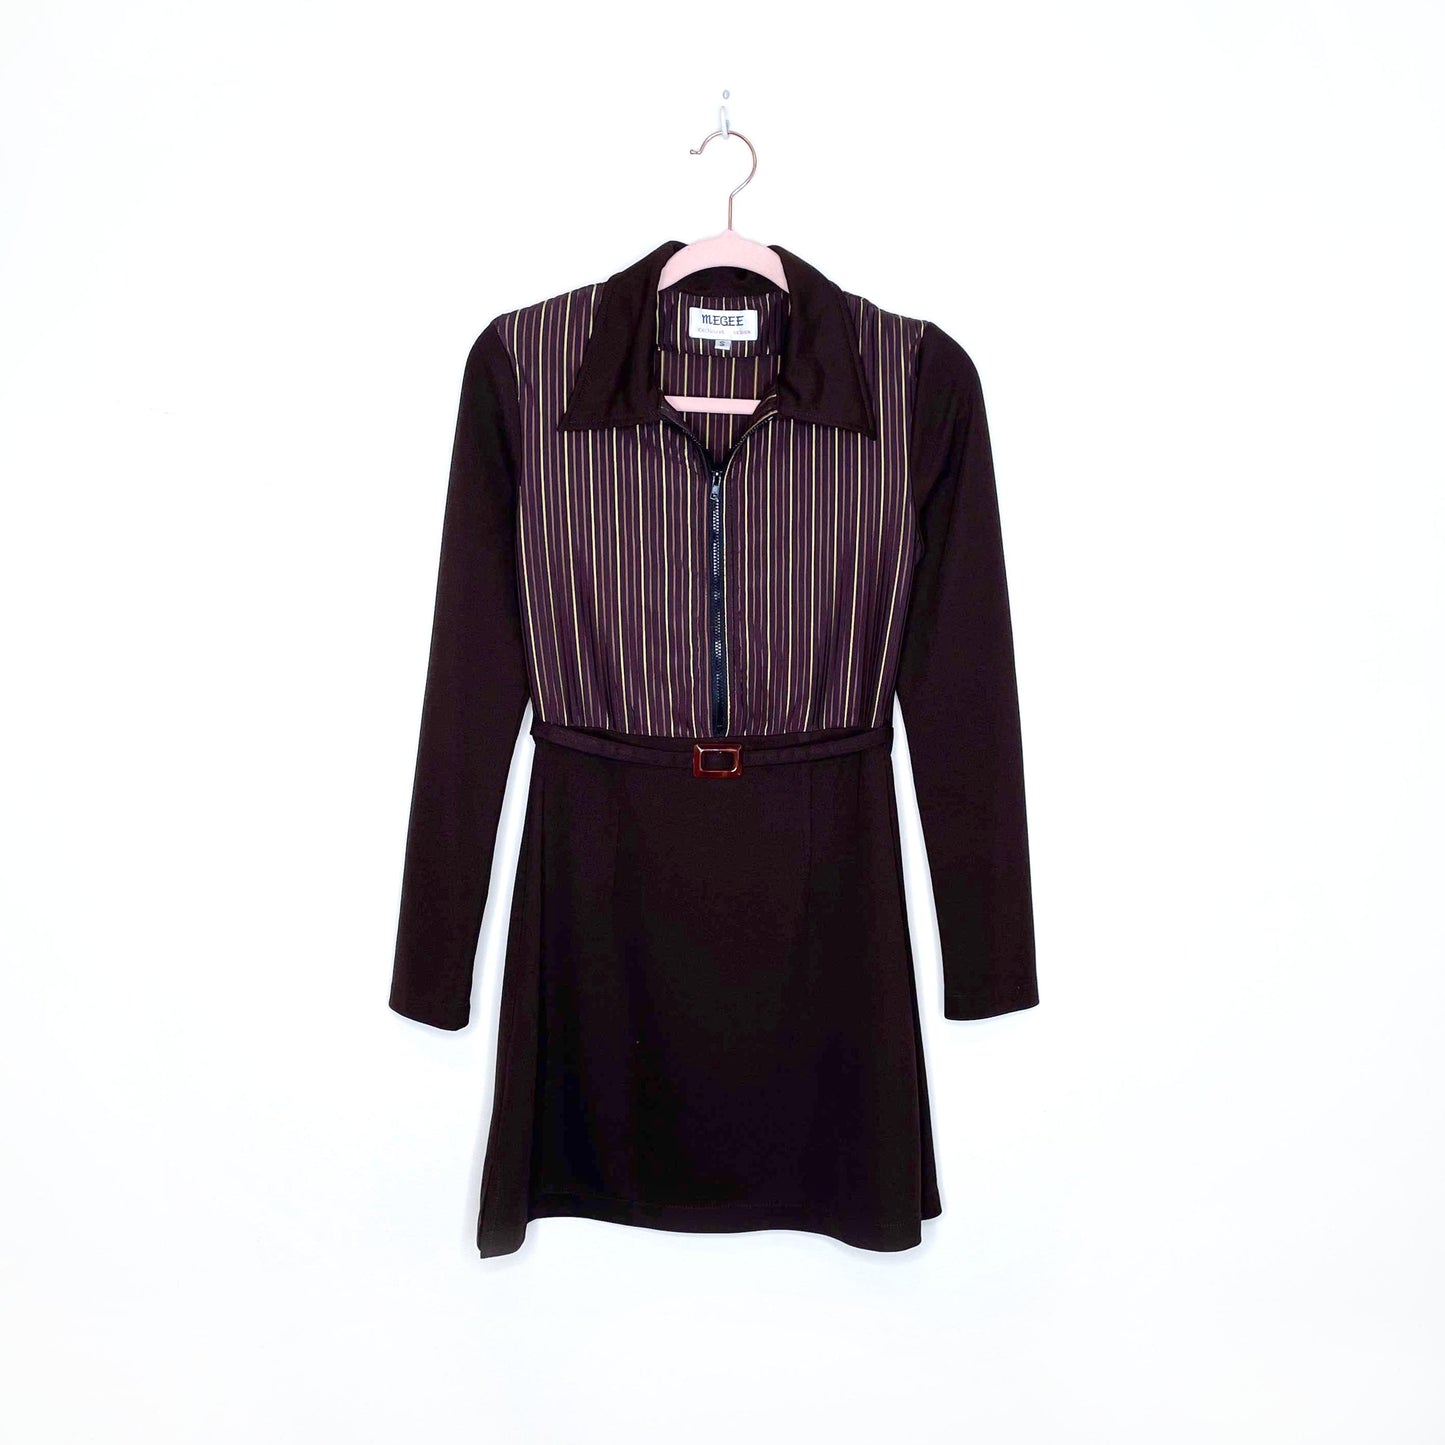 vintage 70's megee retro brown striped shirt dress - size small